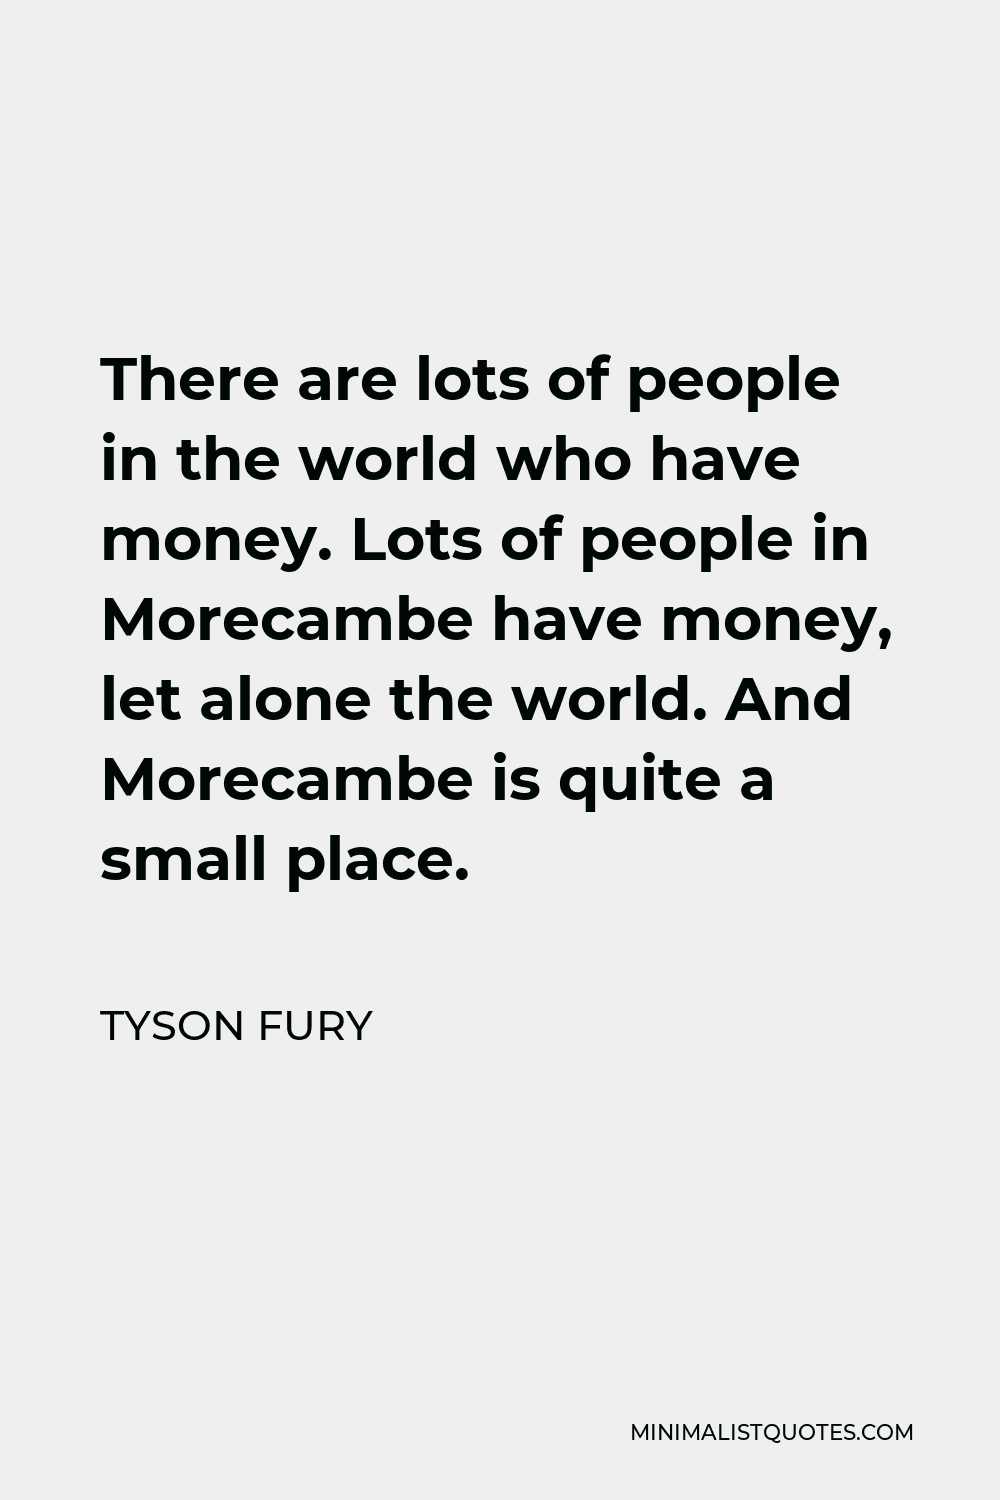 Tyson Fury Quote - There are lots of people in the world who have money. Lots of people in Morecambe have money, let alone the world. And Morecambe is quite a small place.